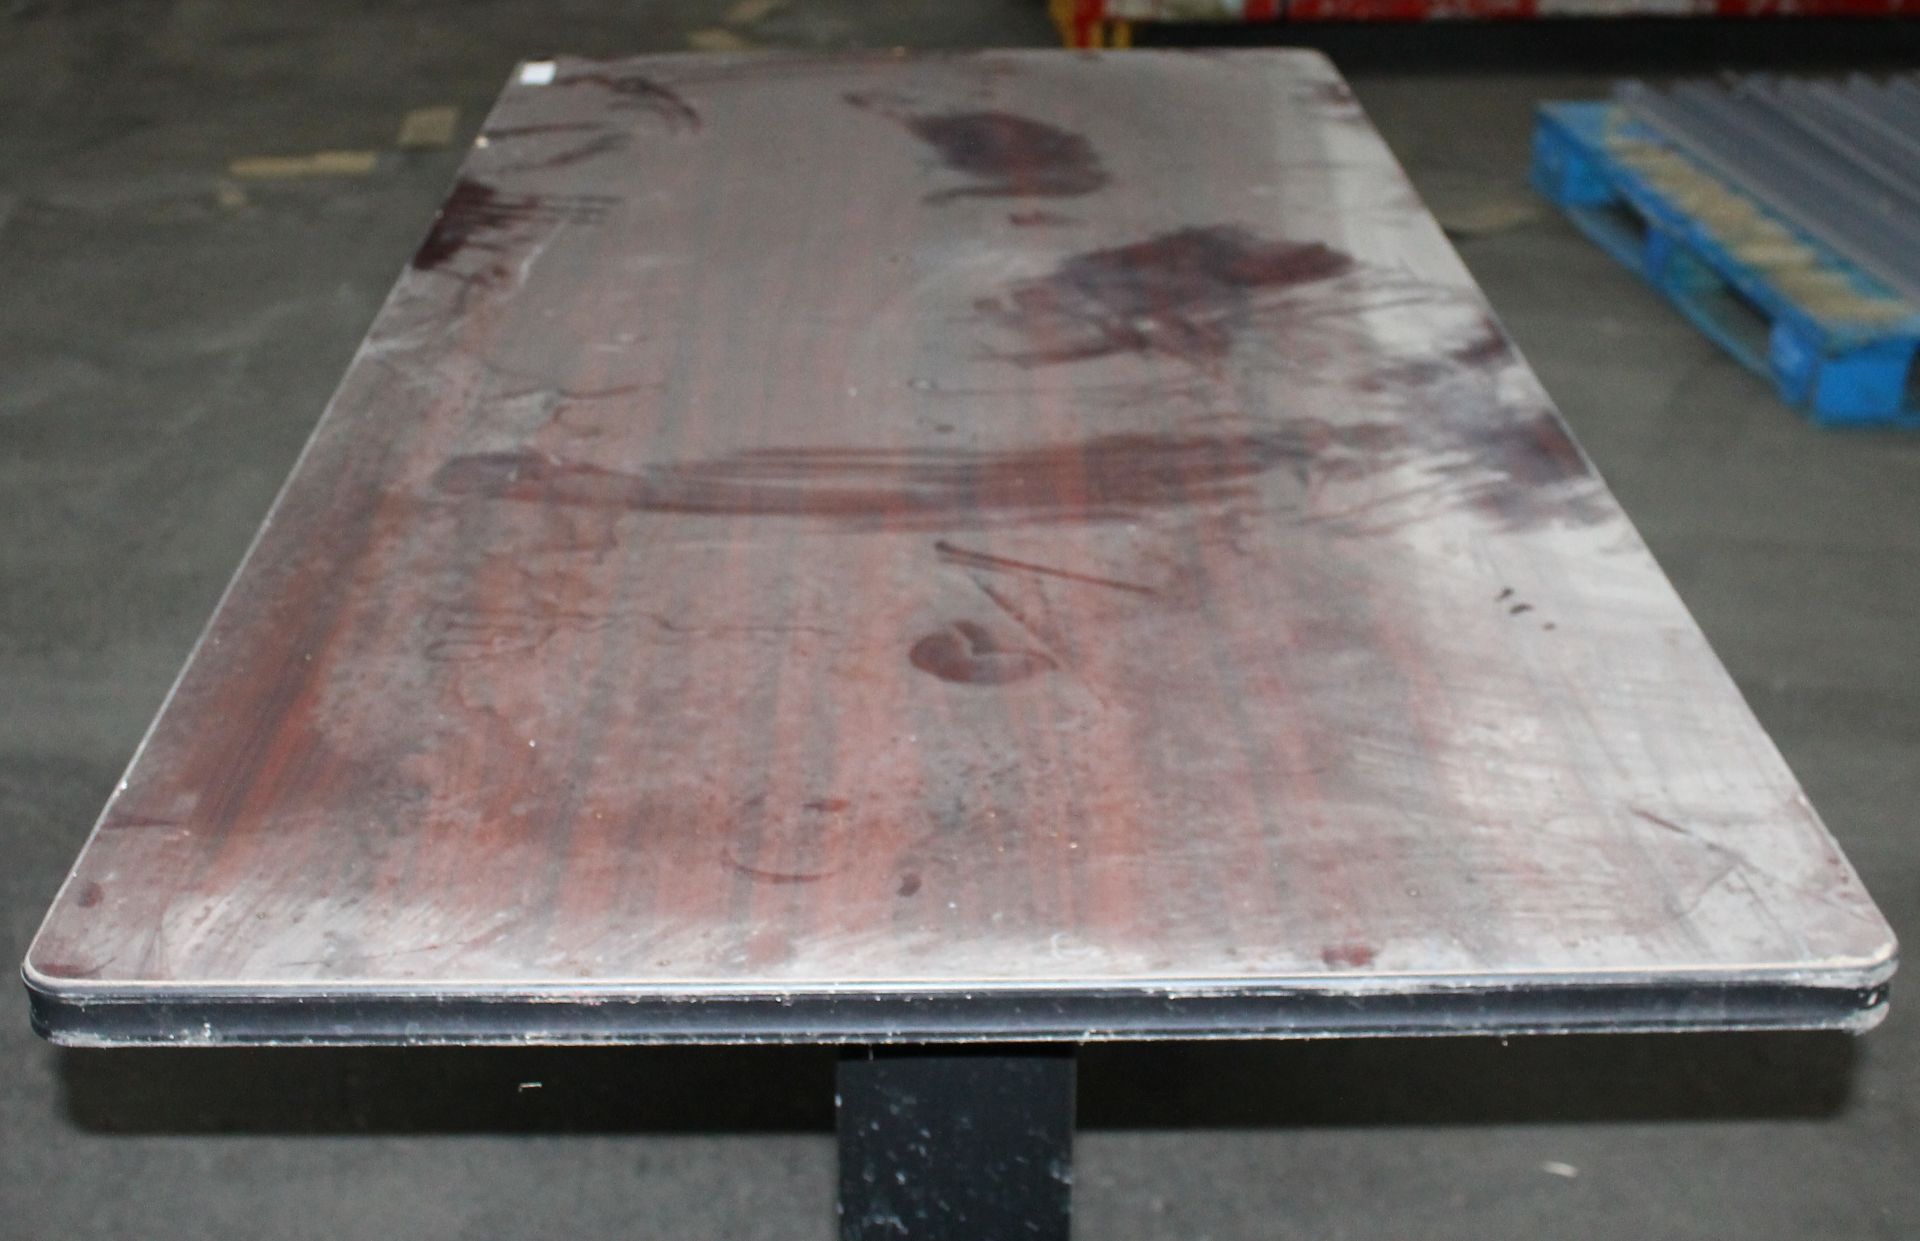 5 FT METAL LEGGED WORKSHOP TABLE WITH WOODEN TOP - Image 3 of 3